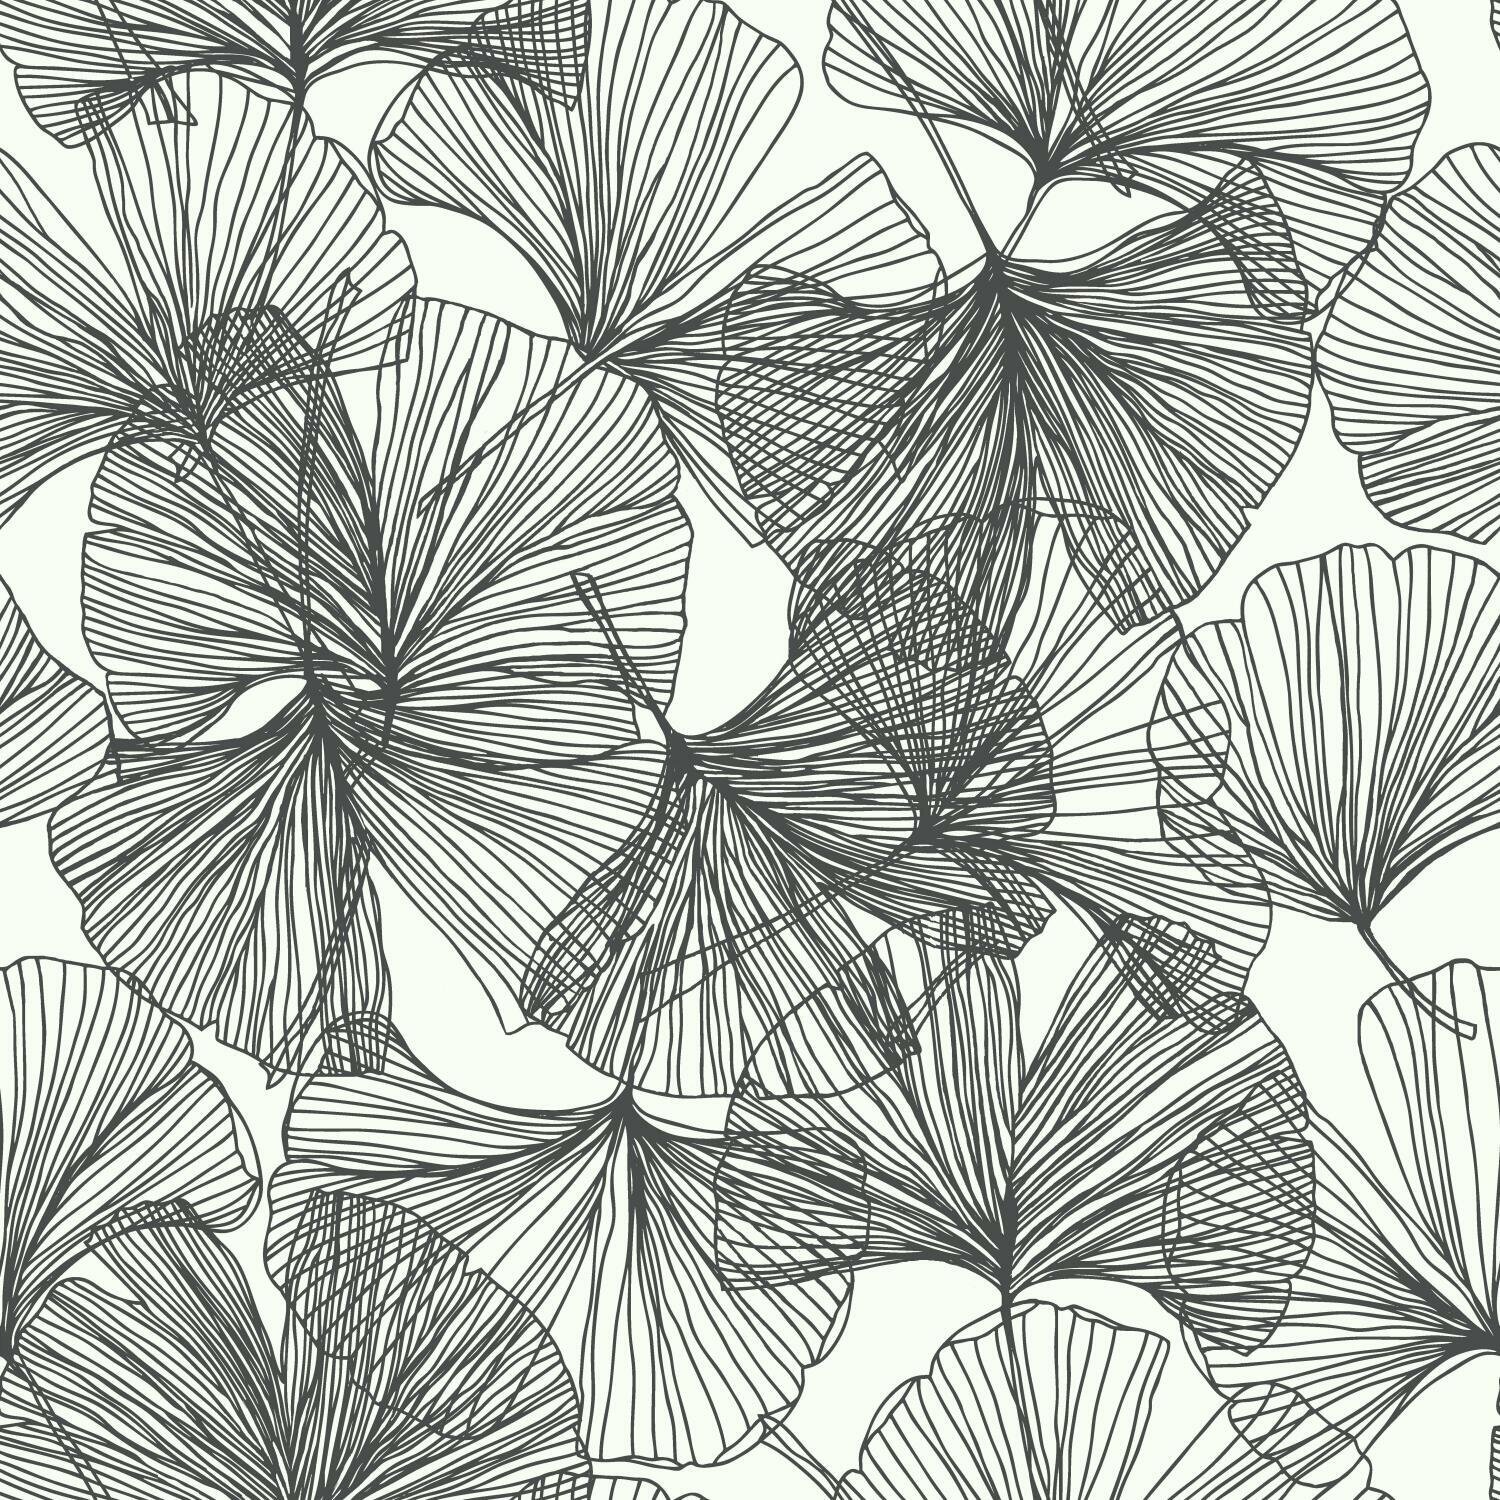 Peel-and-Stick Removable Wallpaper Palm Tropical Leaves Jungle Black And White